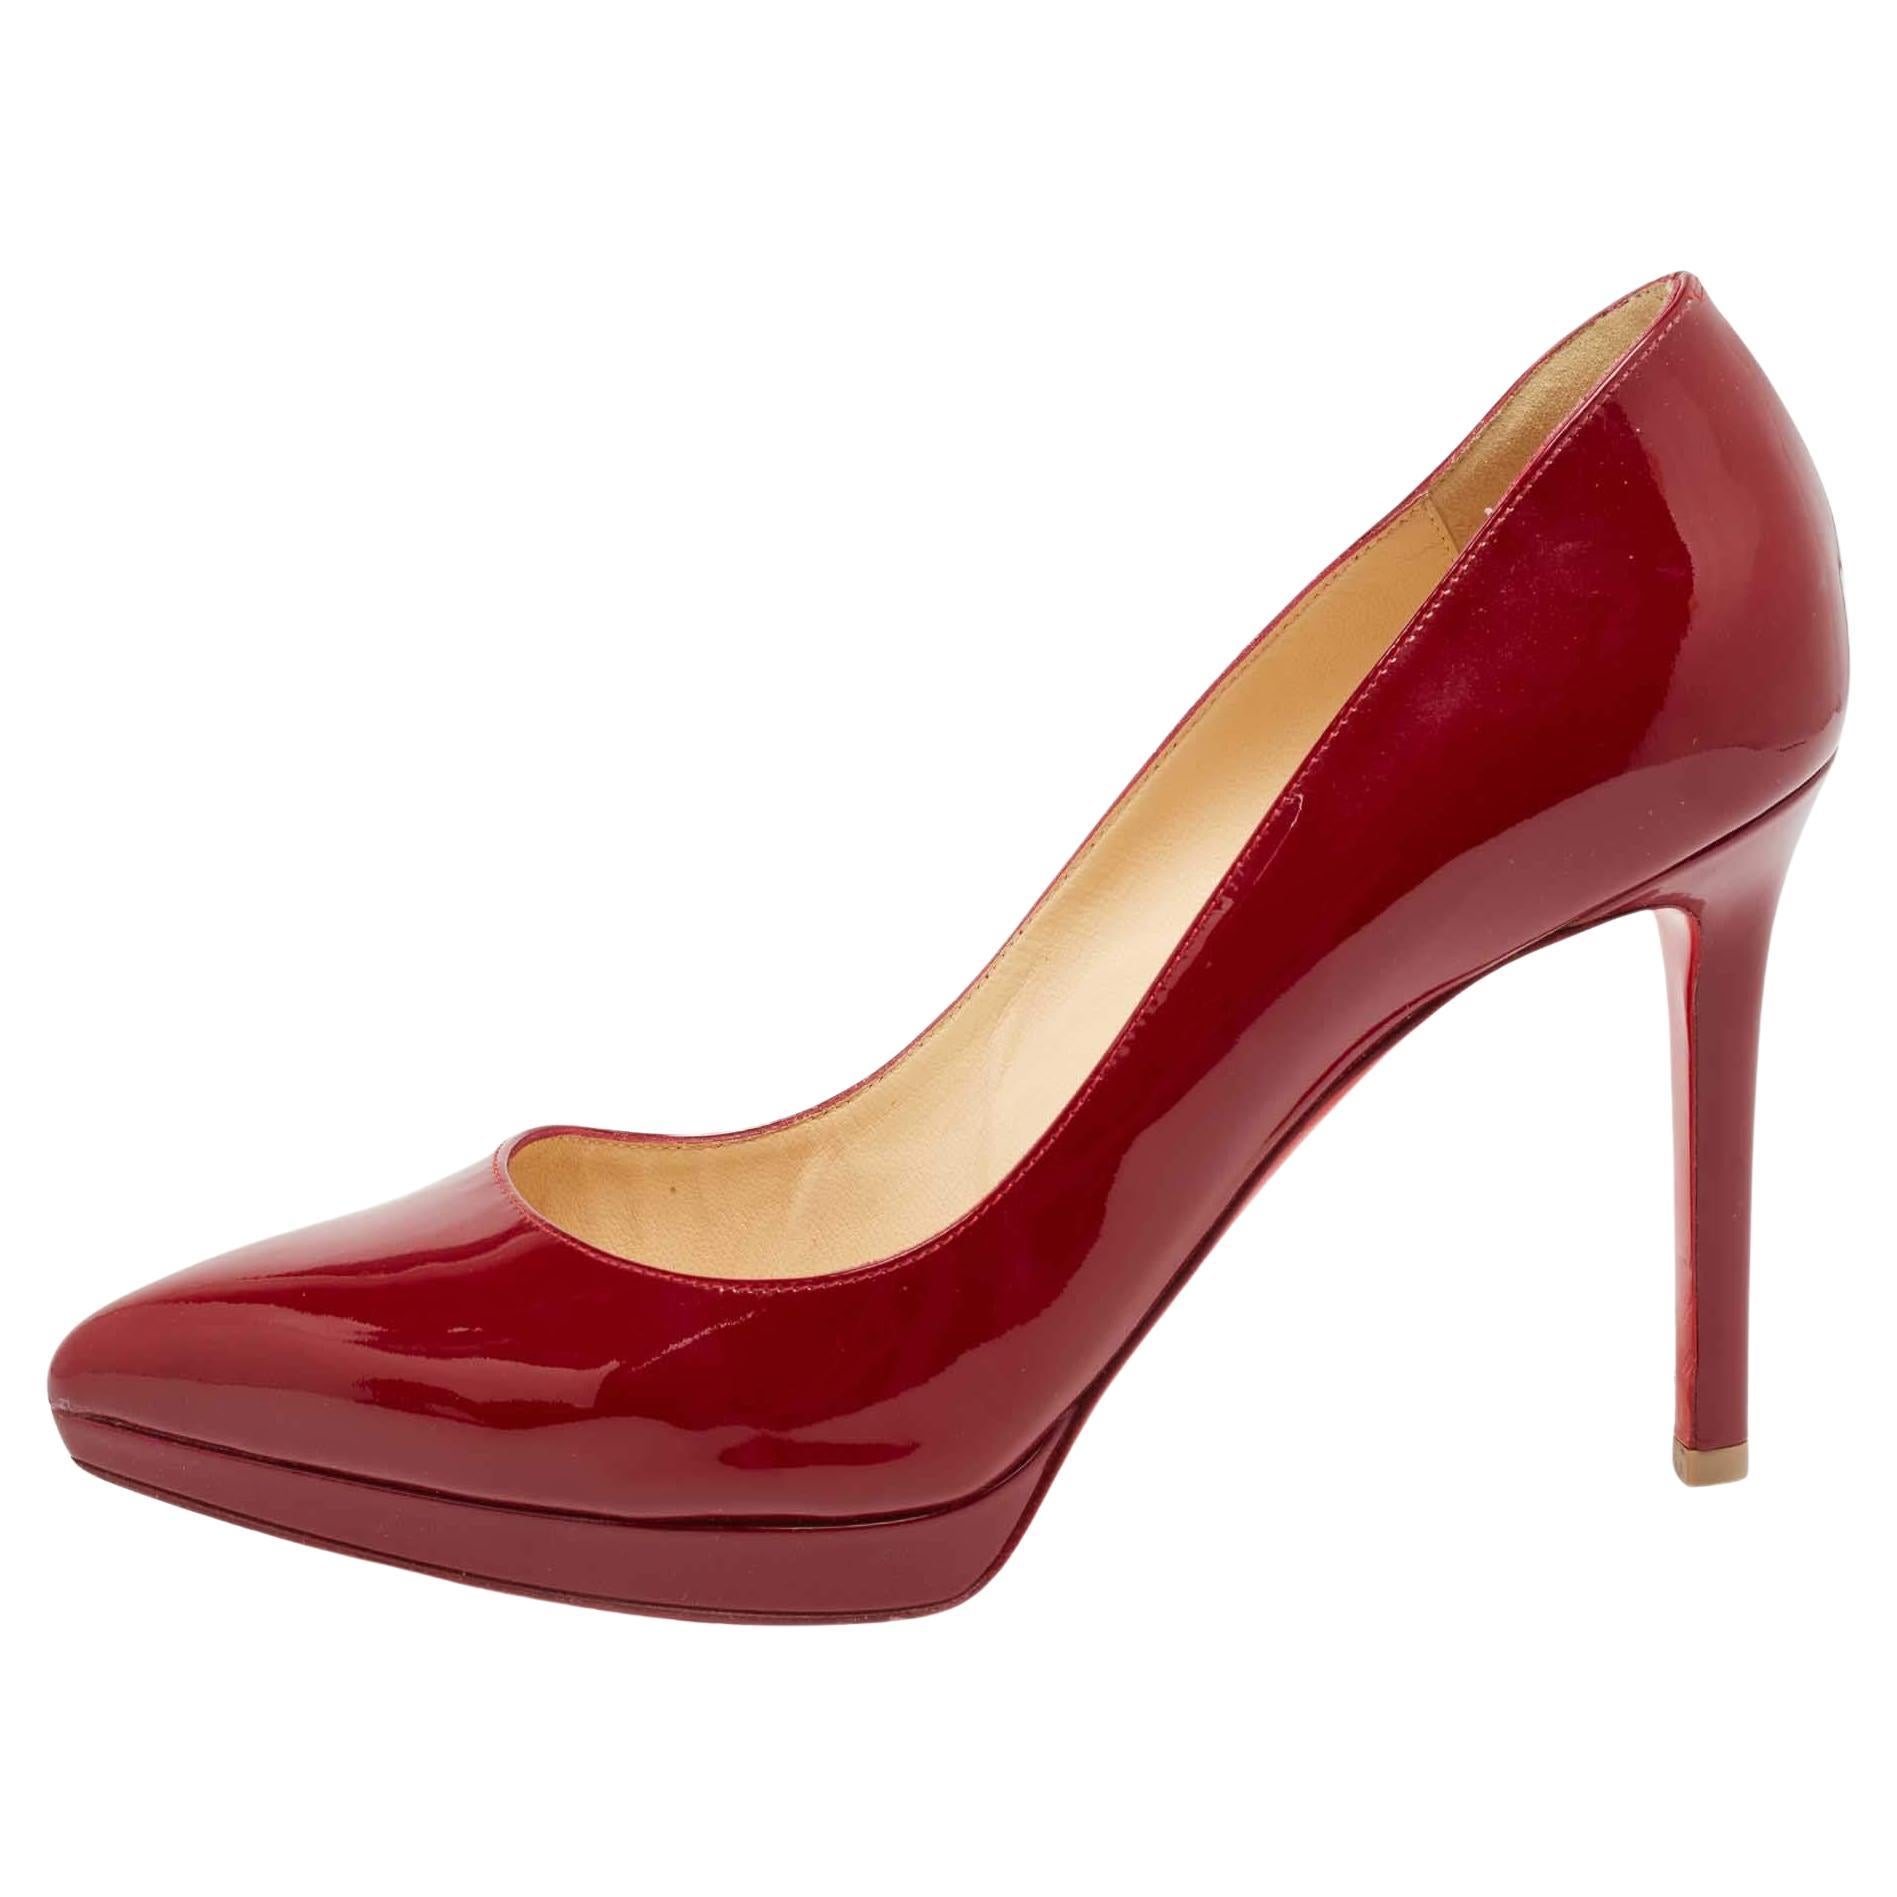 Christian Louboutin Burgundy Patent Leather Pigalle Plato Pumps Size 39